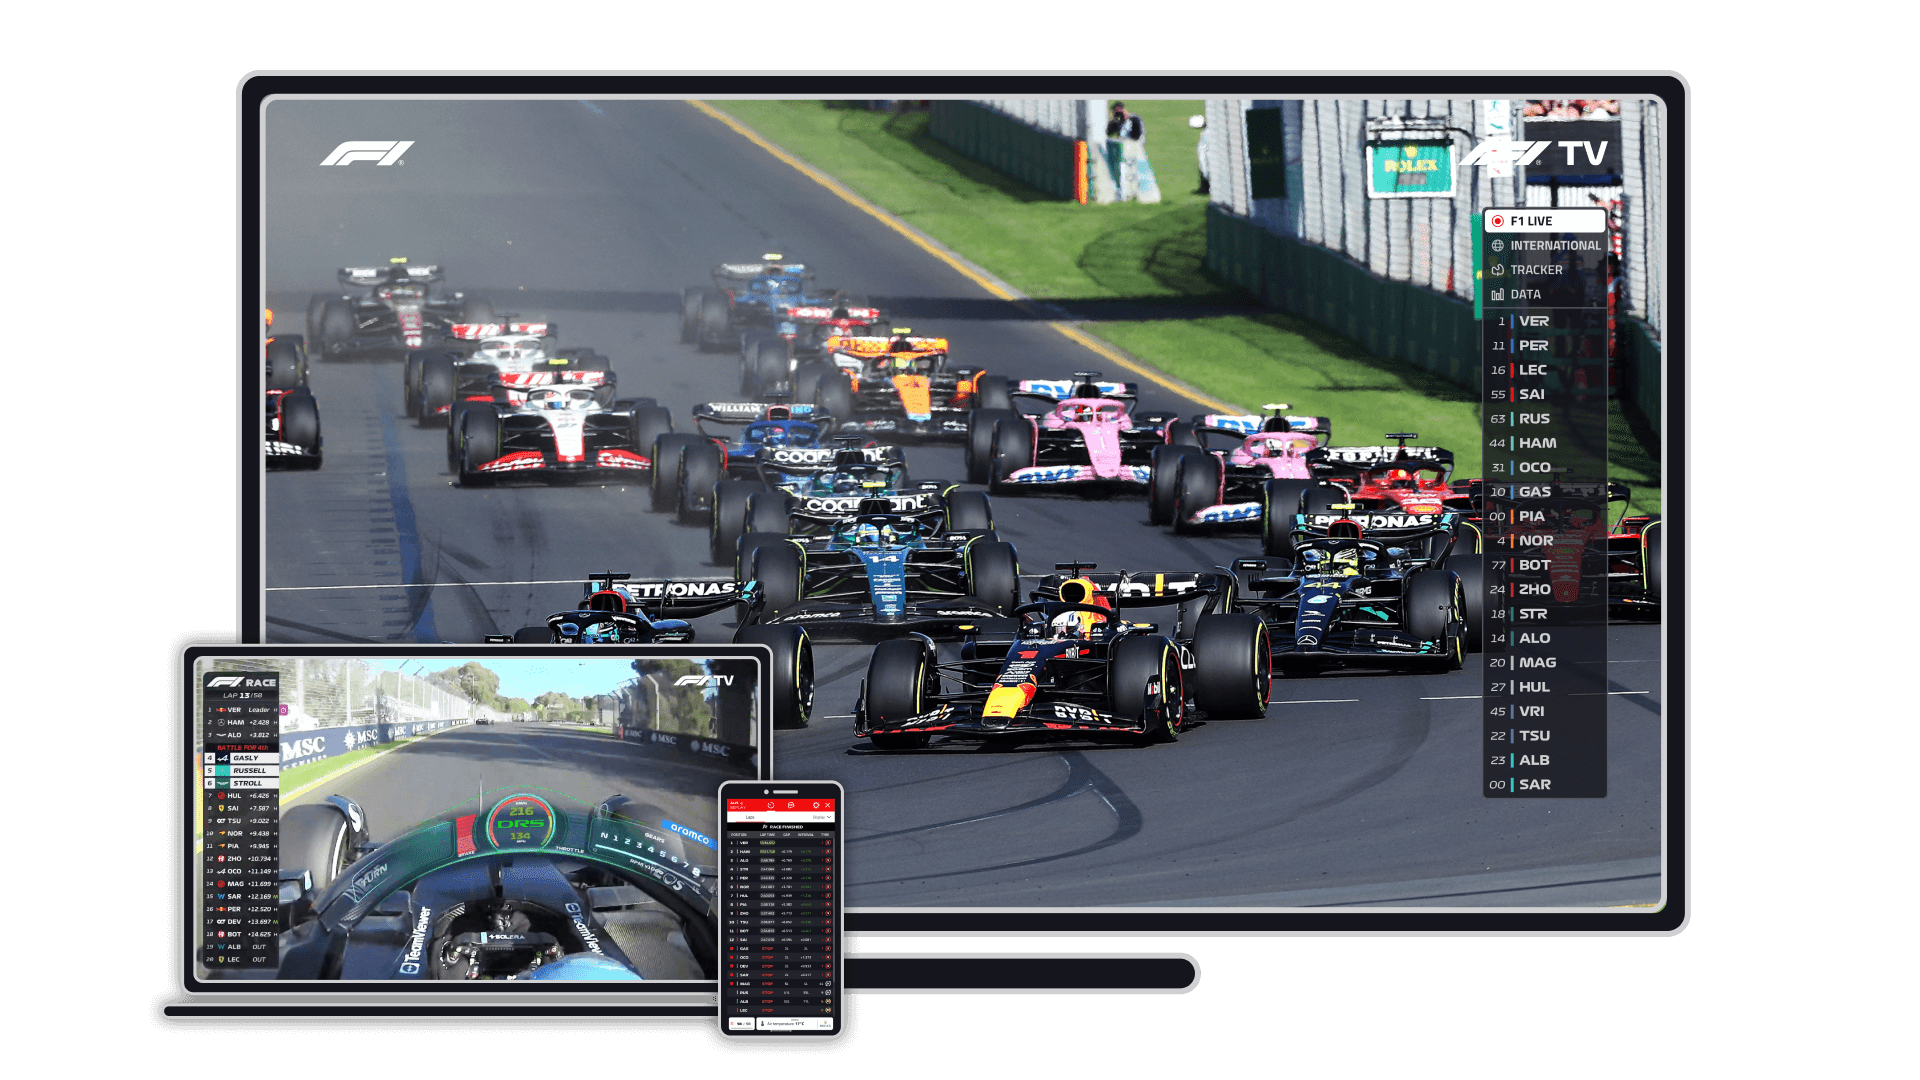 Get 15% off an F1 TV Pro subscription and livestream every second